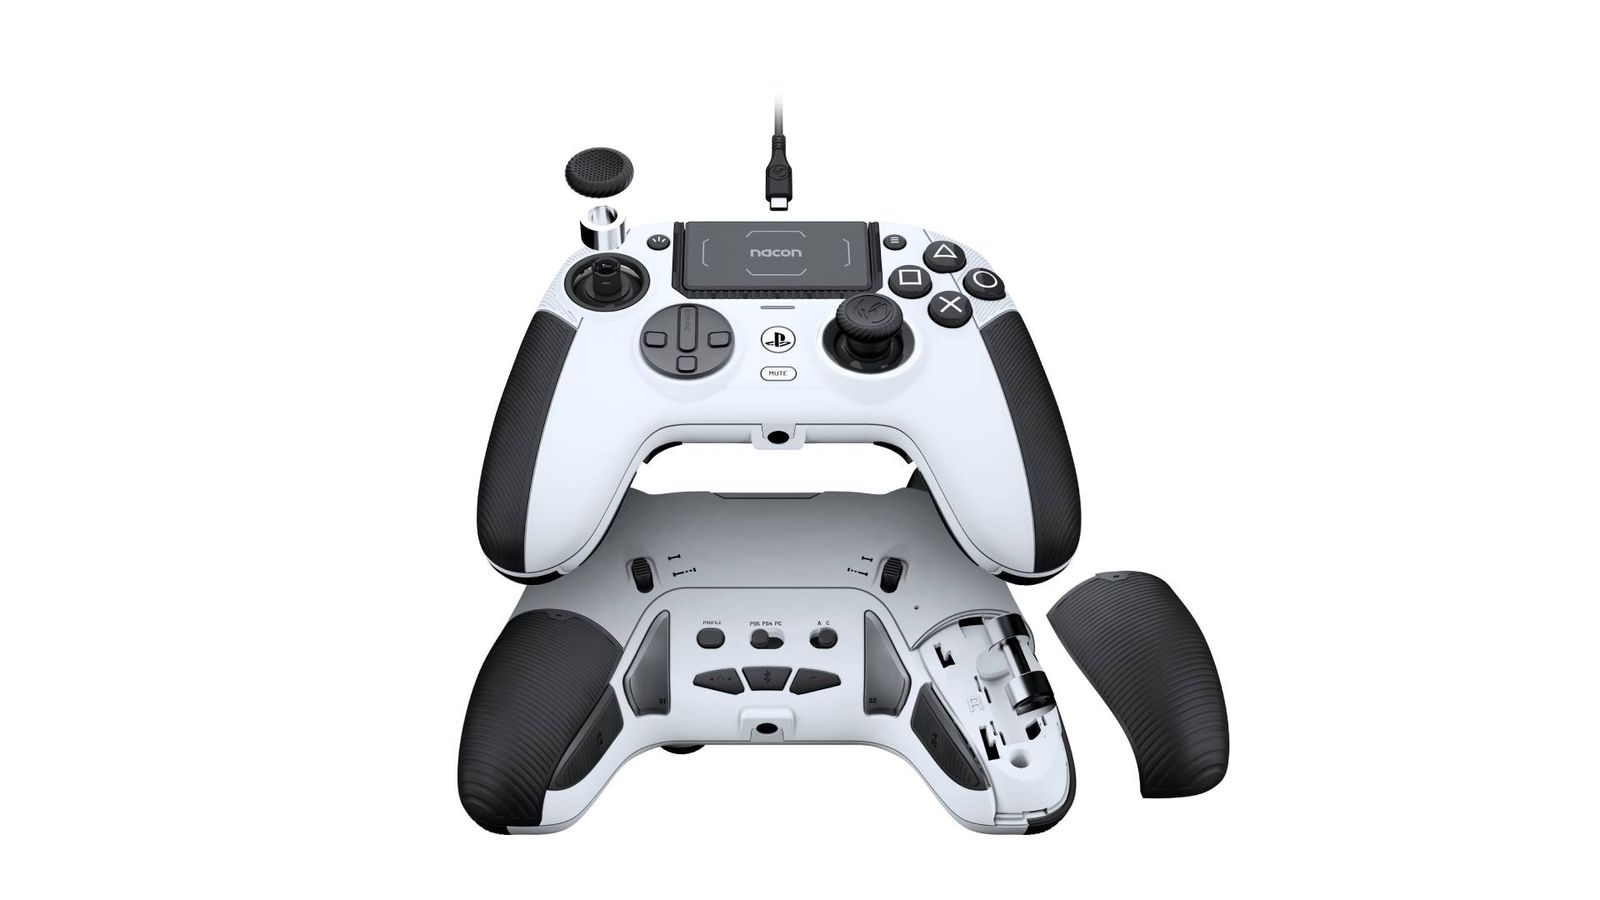 Nacon revolution 5 pro controller in white exploded view